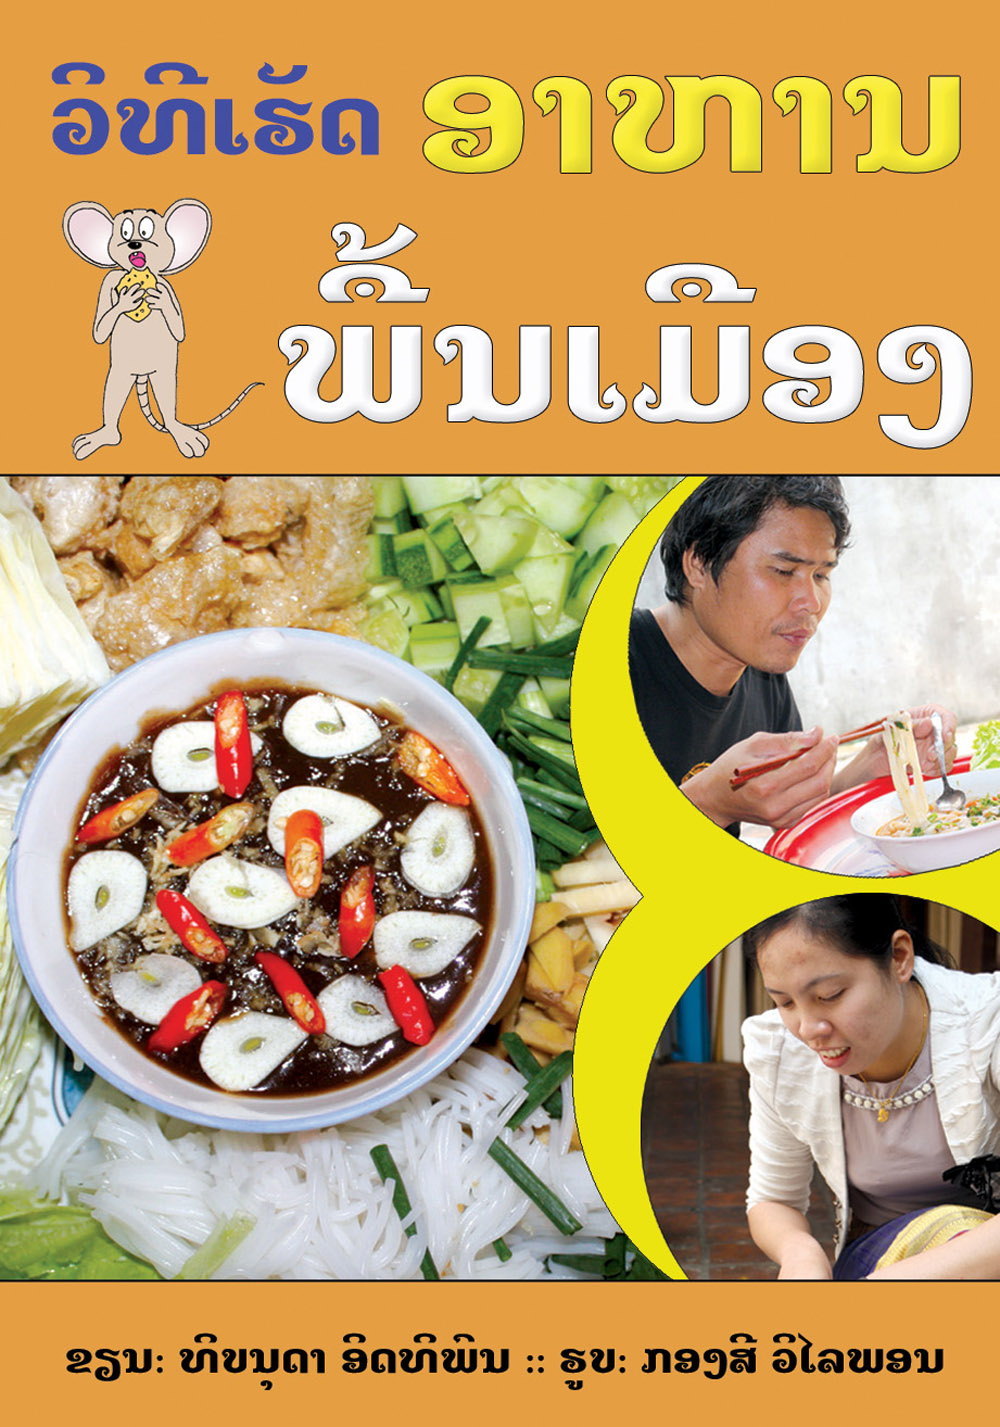 Our Food Heritage large book cover, published in Lao language